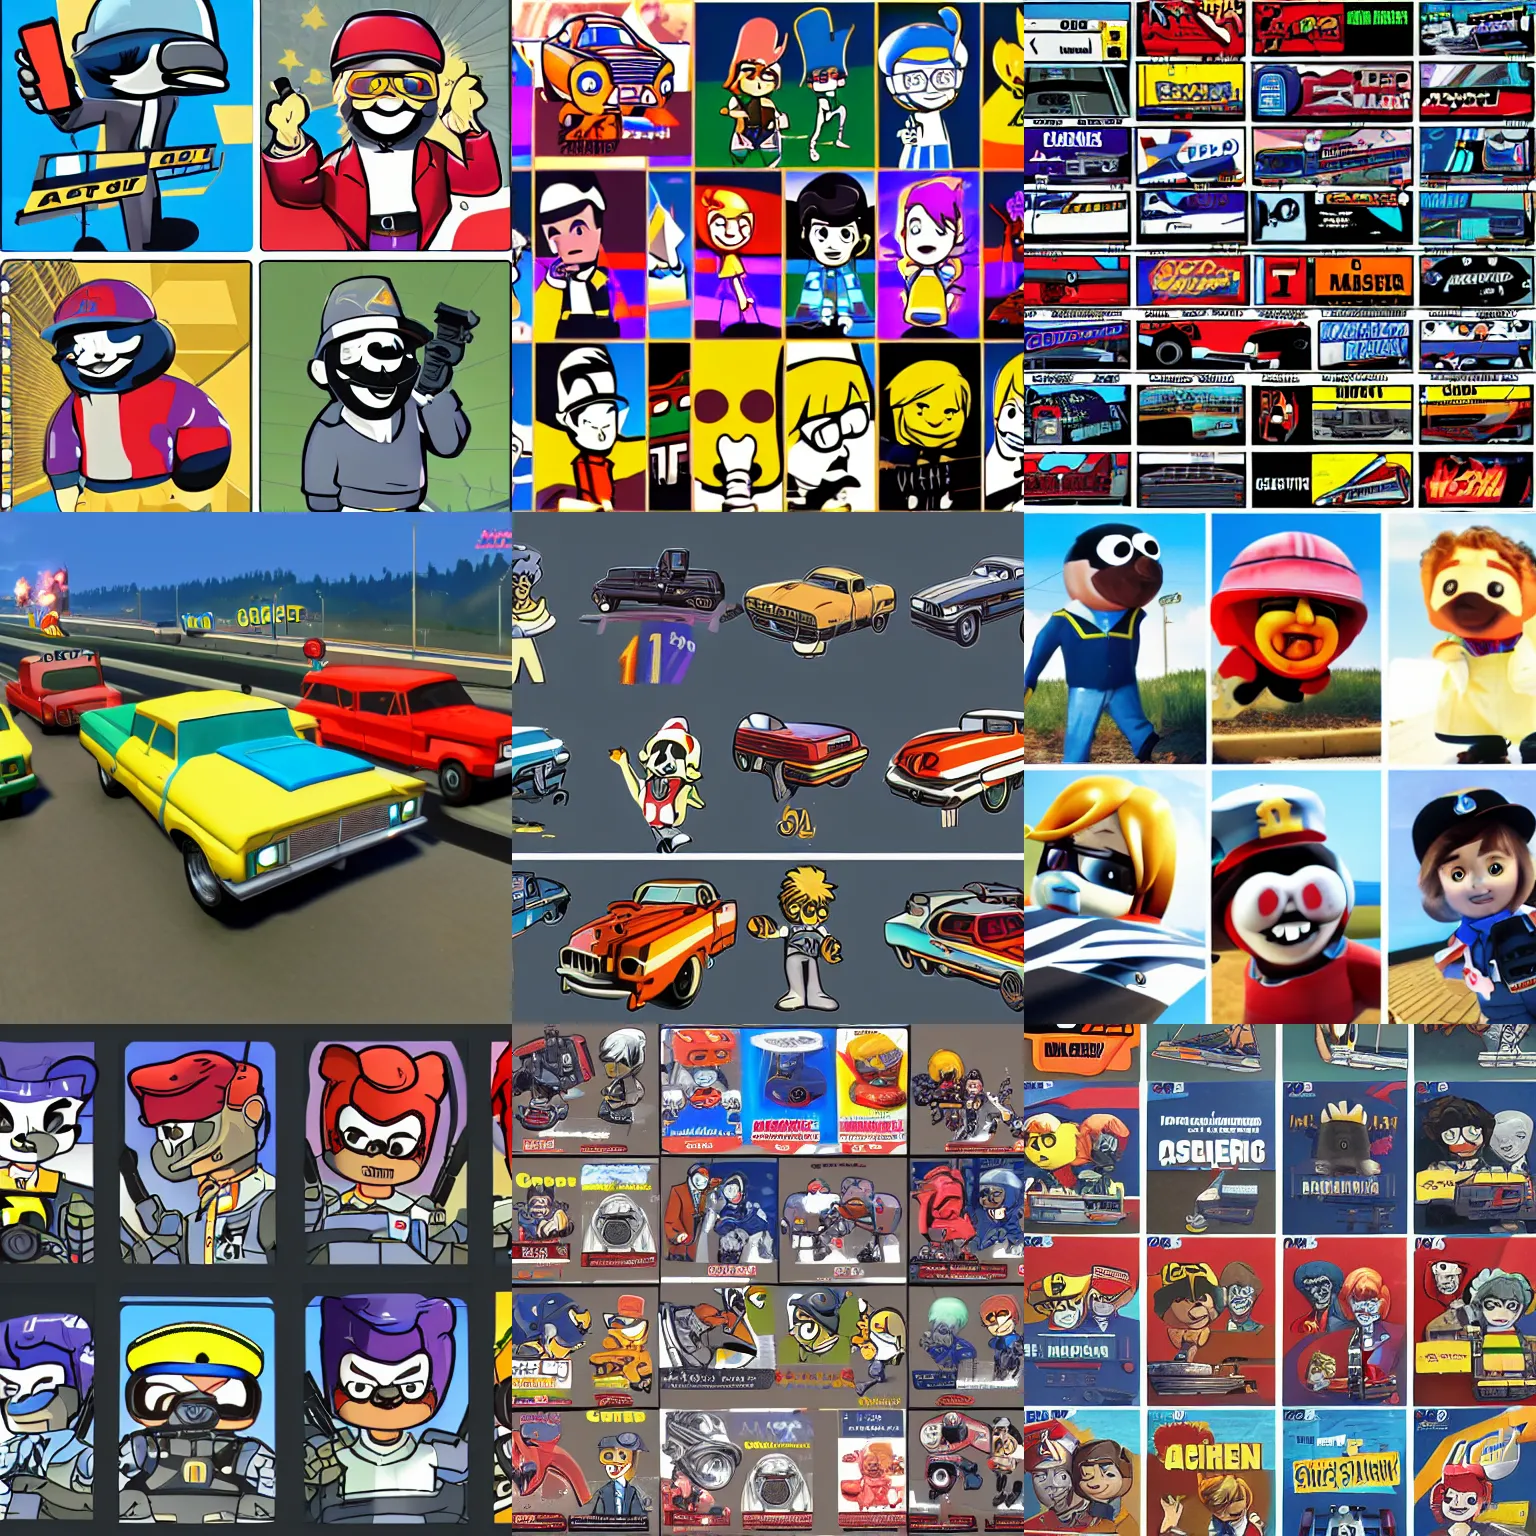 Prompt: a collection of several interstate 7 6 by activision characters